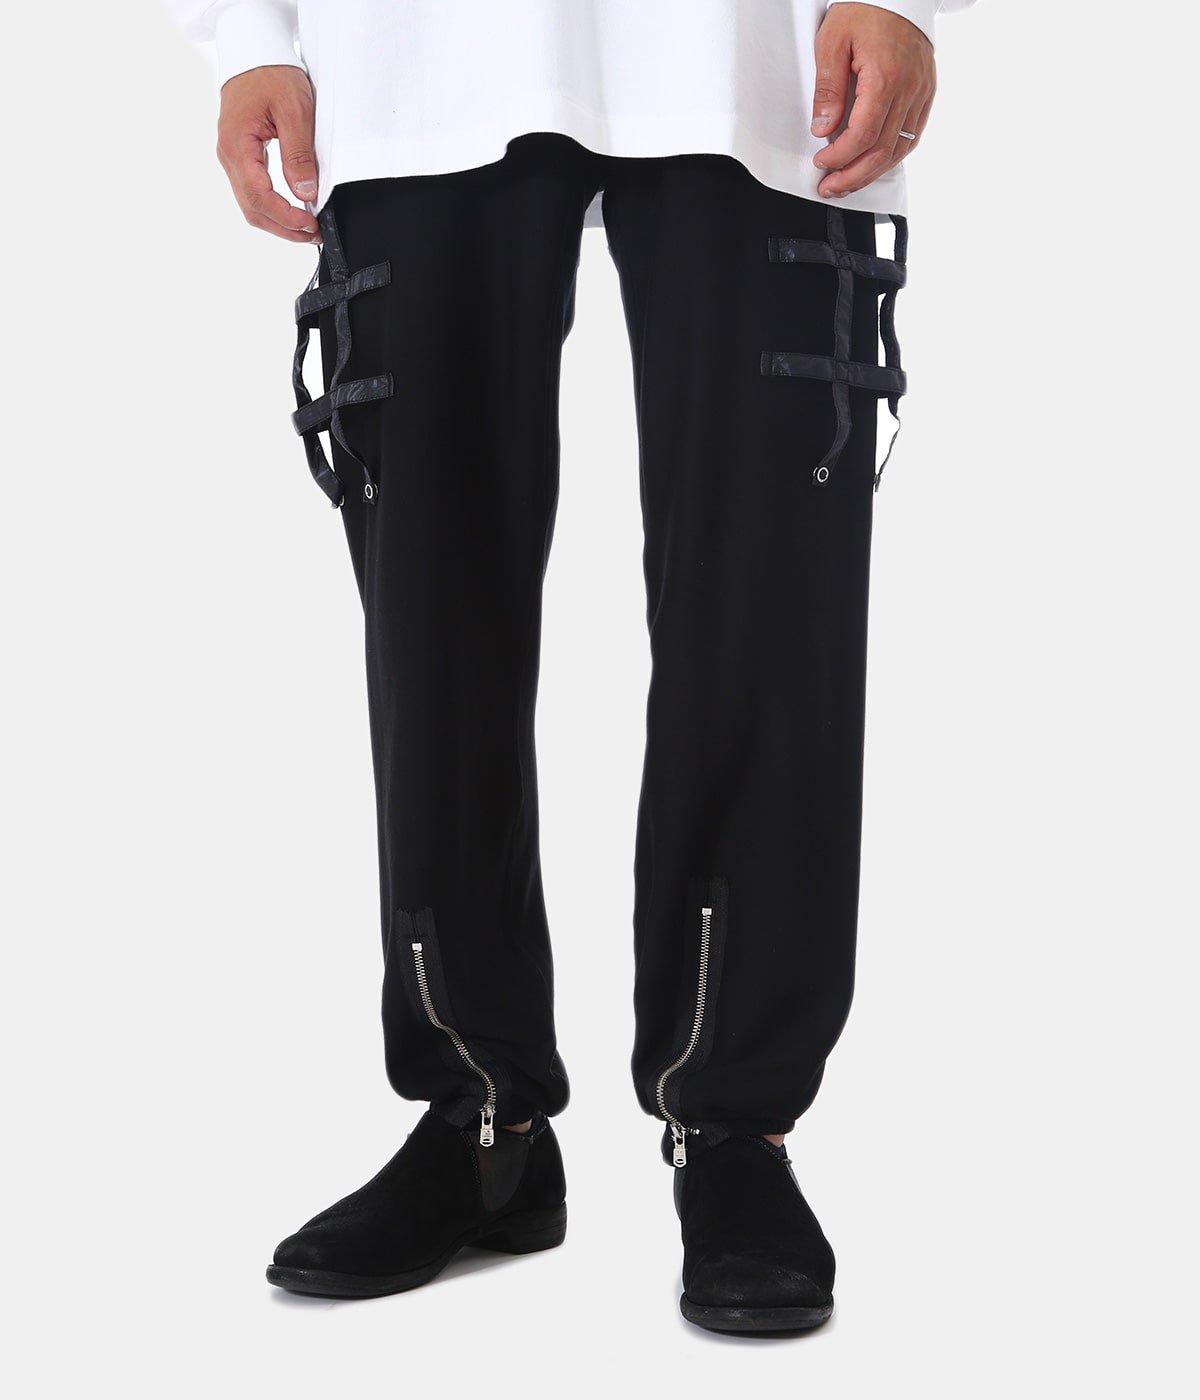 space jogger pant.